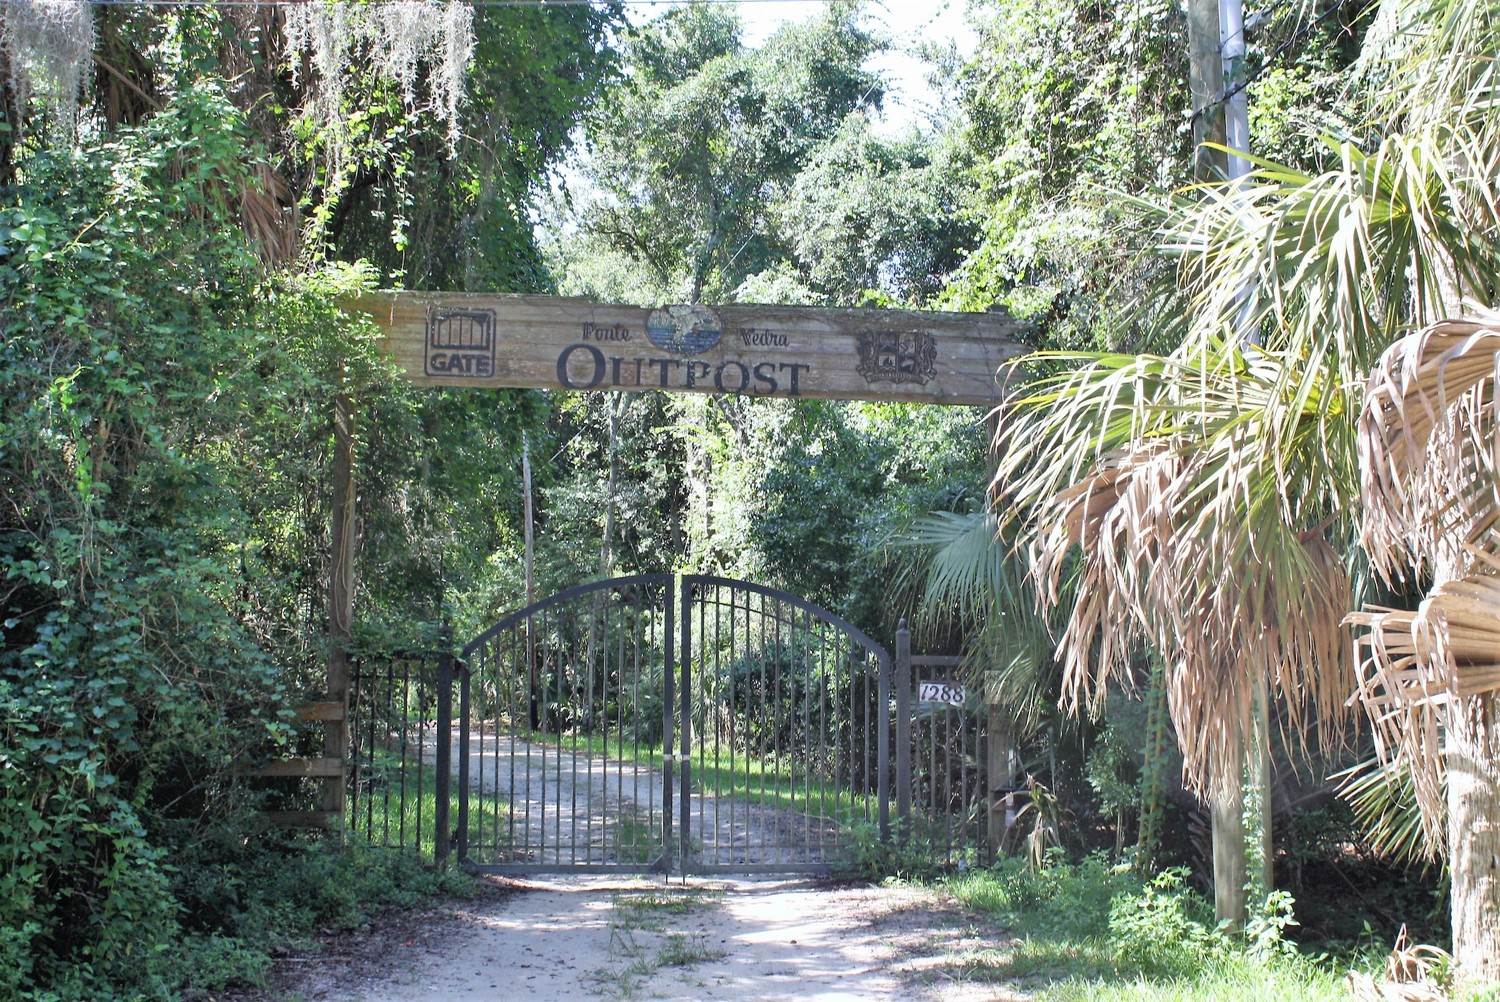 The Outpost property is located at the end of Neck Road and adjacent to the GTM Research Reserve.